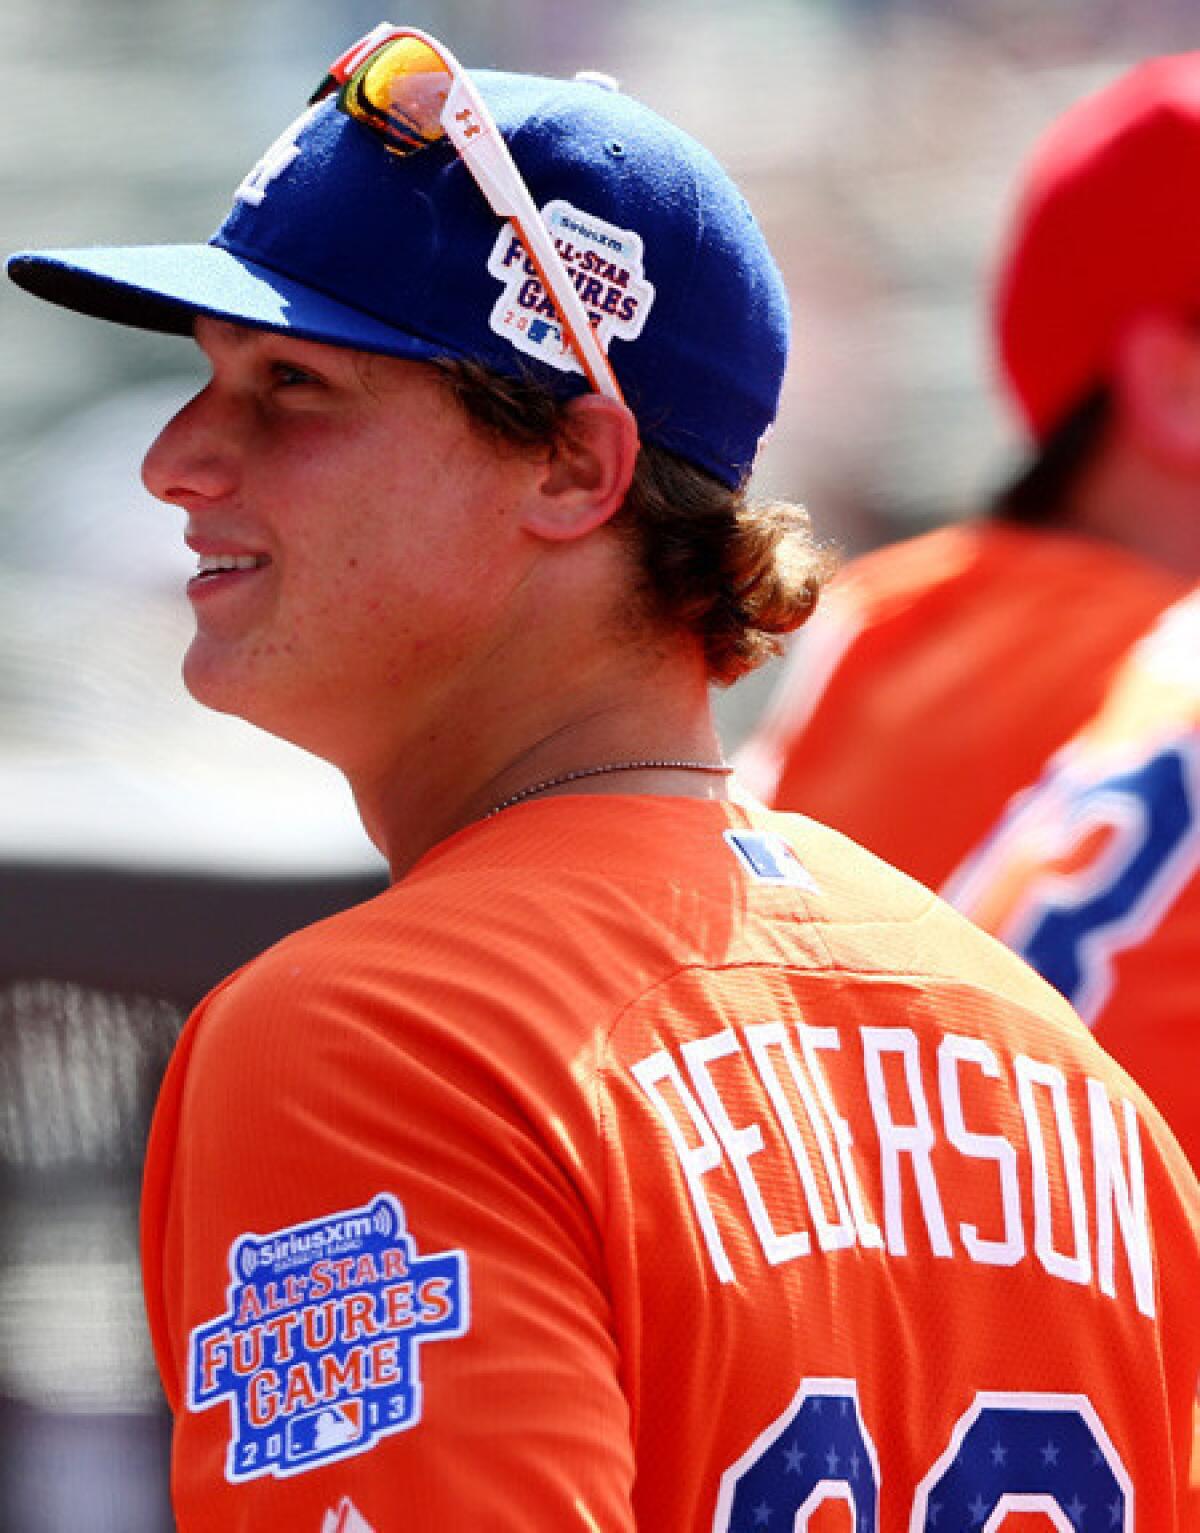 Dodgers minor leaguer Joc Pederson during the Futures All-Star game last summer at Citi Field in New York.